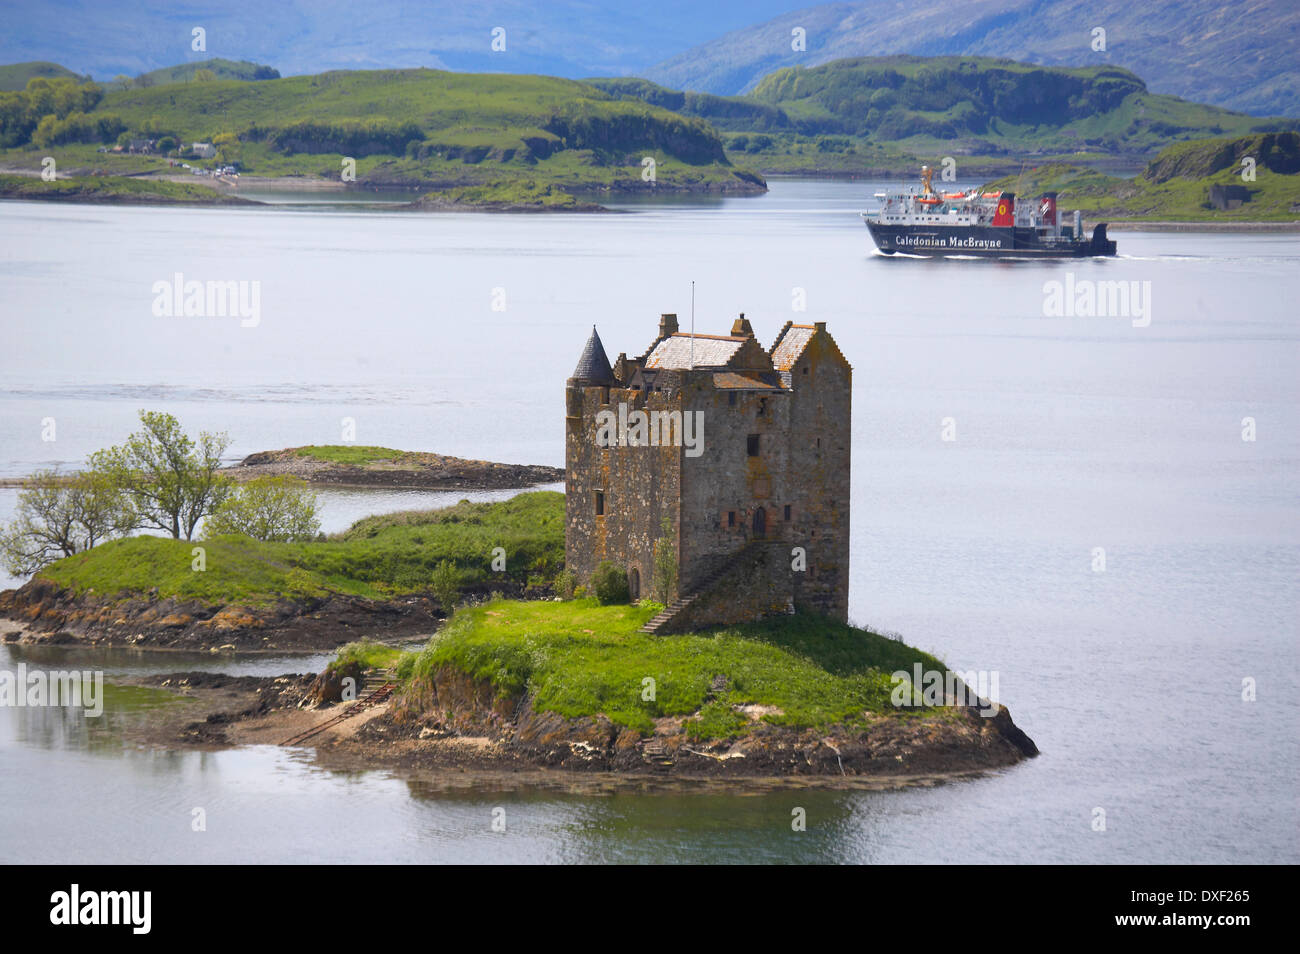 M.V.Lord of the isles passing Castle Stalker, Appin, Argyll Stock Photo